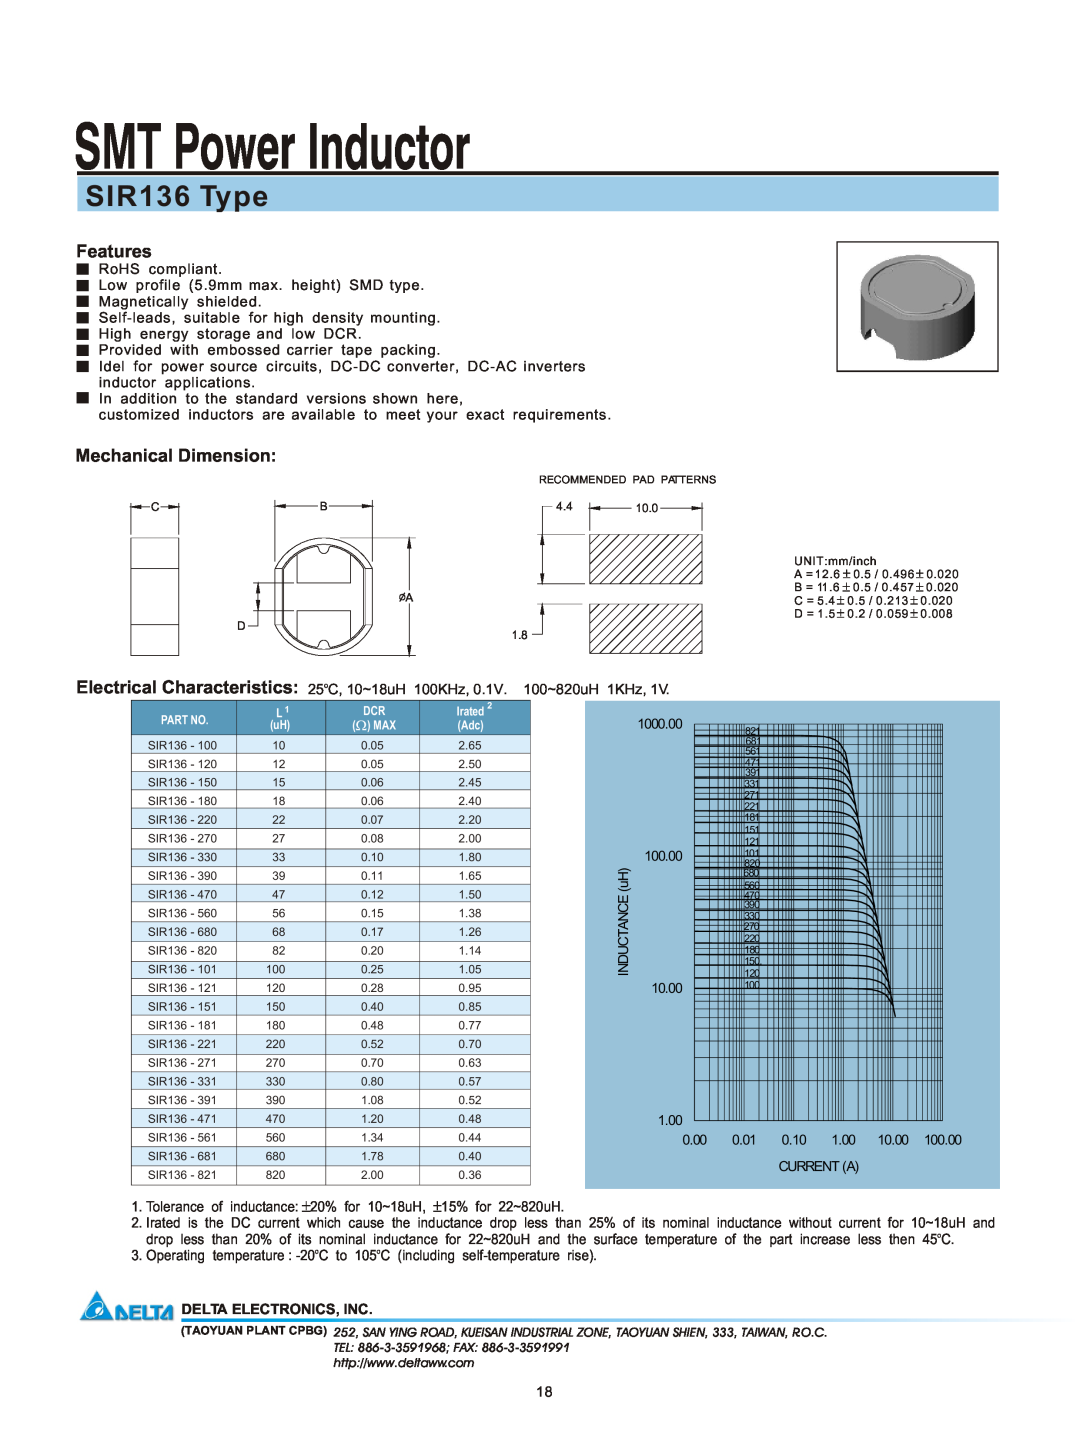 Delta Electronics manual SMT Power Inductor, SIR136 Type, Features, Mechanical Dimension, Delta Electronics, Inc 